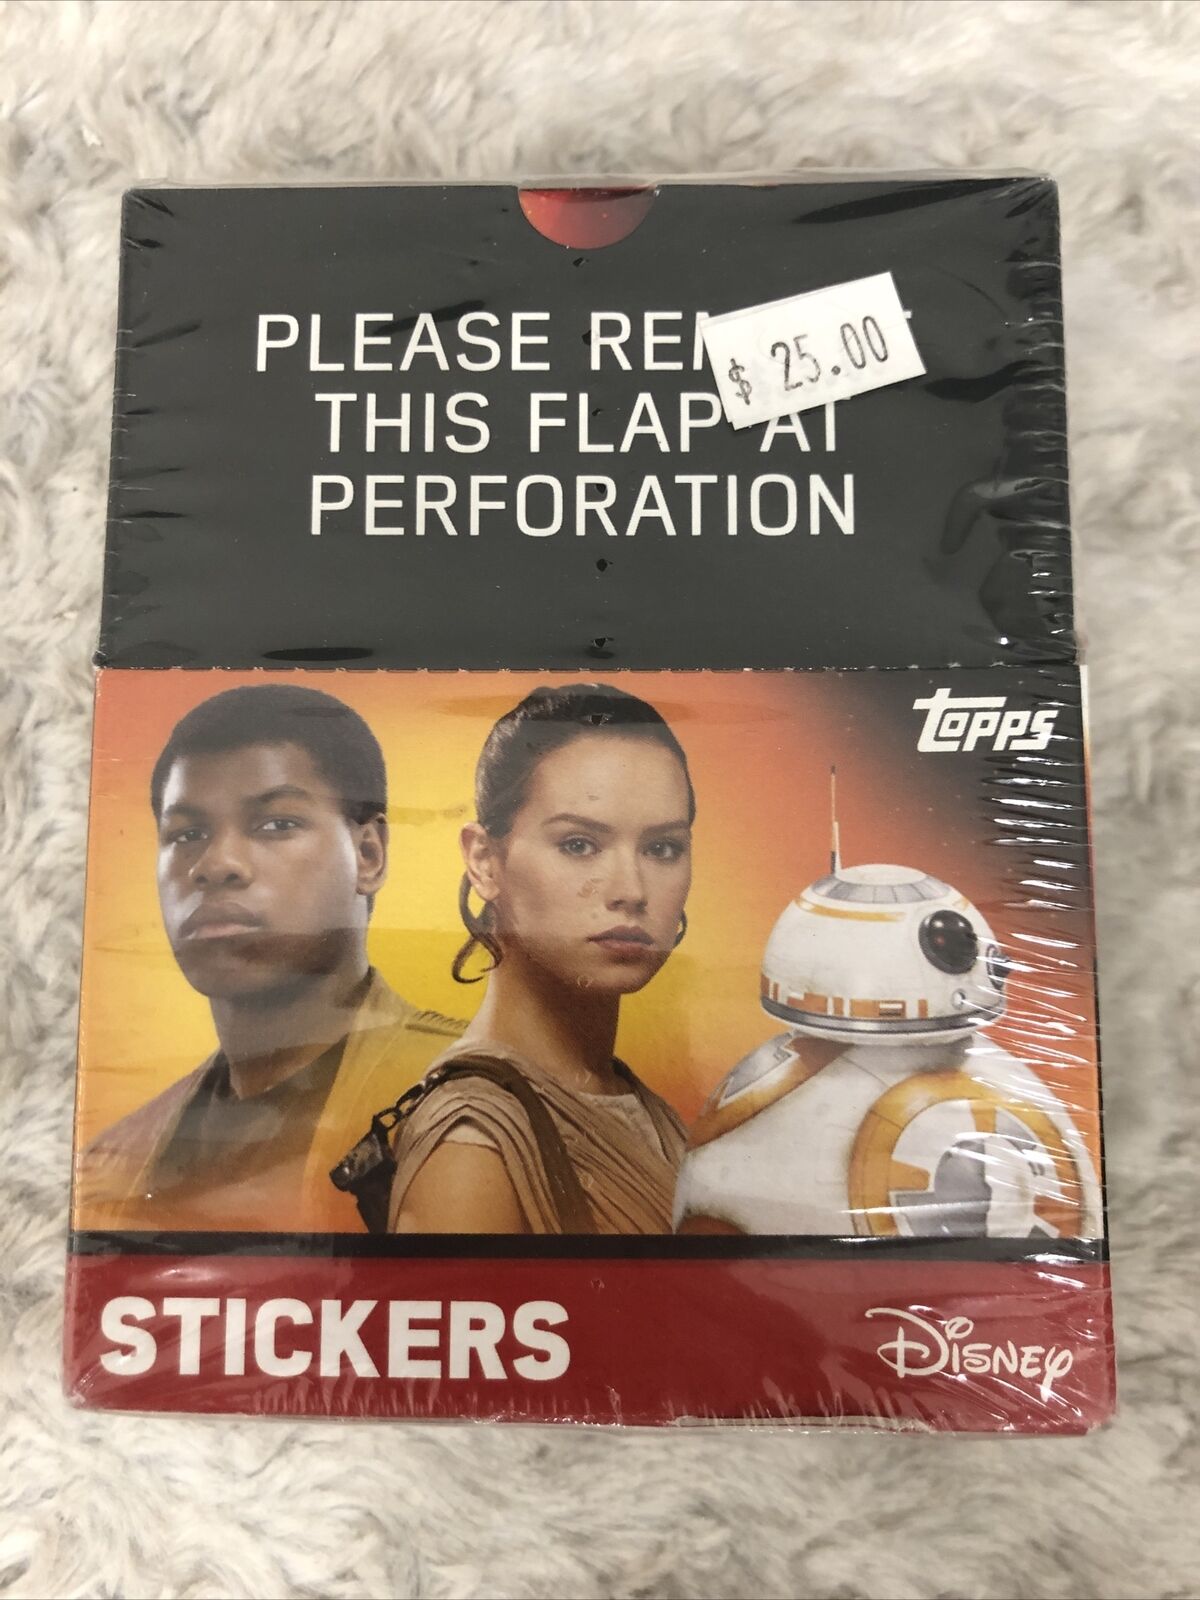 2016 Topps Star Wars The Force Awakens Stickers Factory Sealed Box NEW 50 Packet